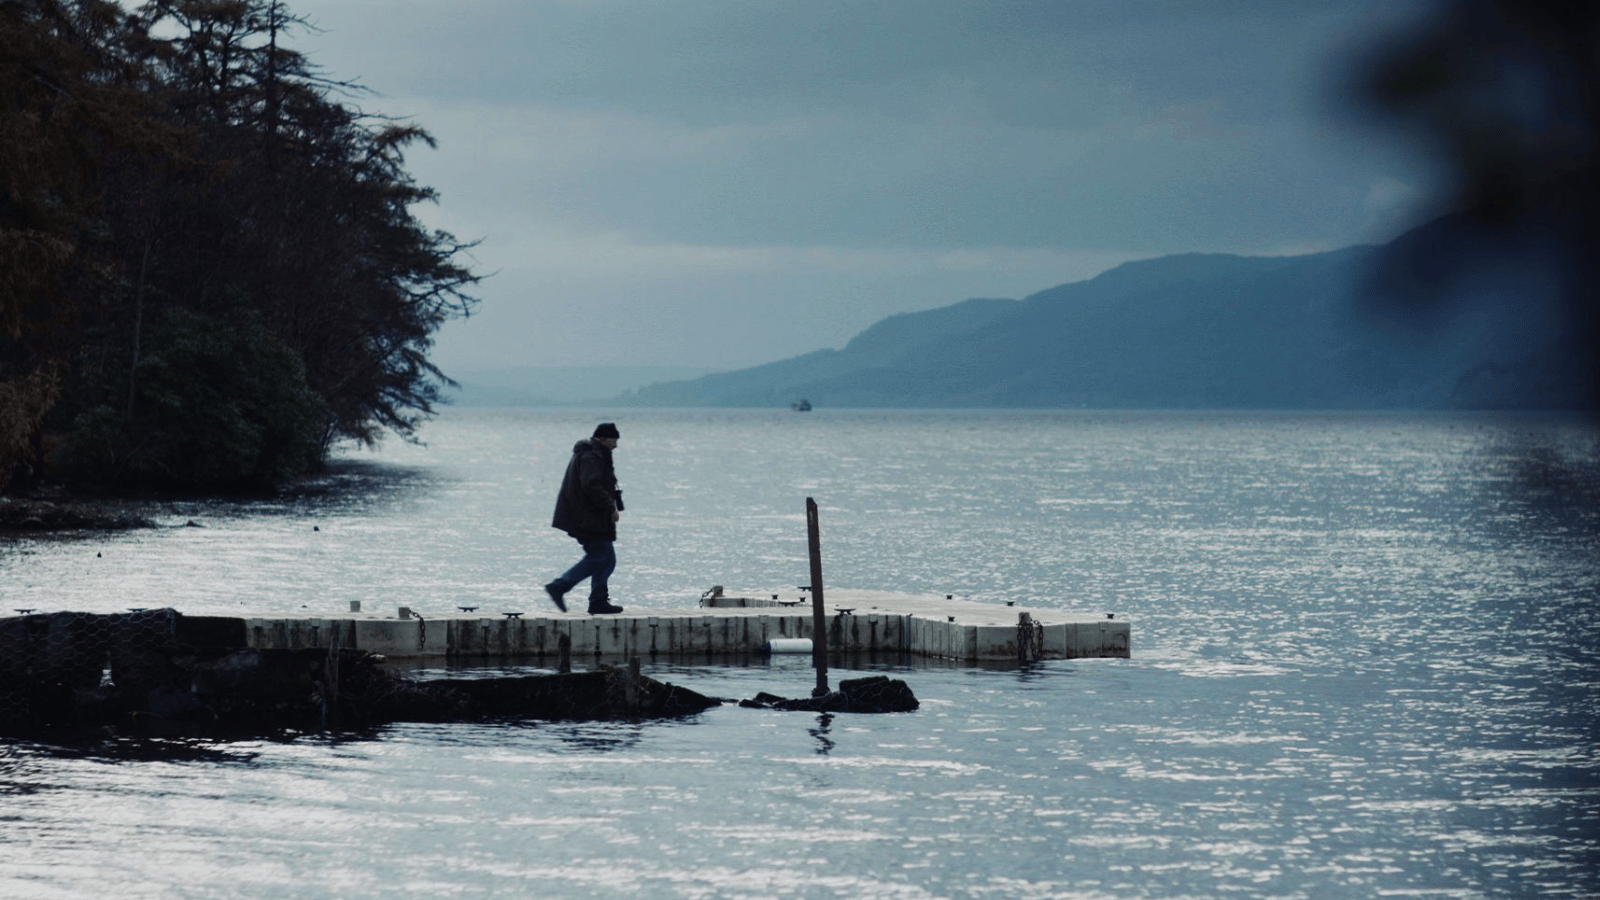 Man walking on a jetty in the middle of a loch in Inverness. Still from Loch Ness: They Created a Monster, courtesy of The Scottish Documentary Institute